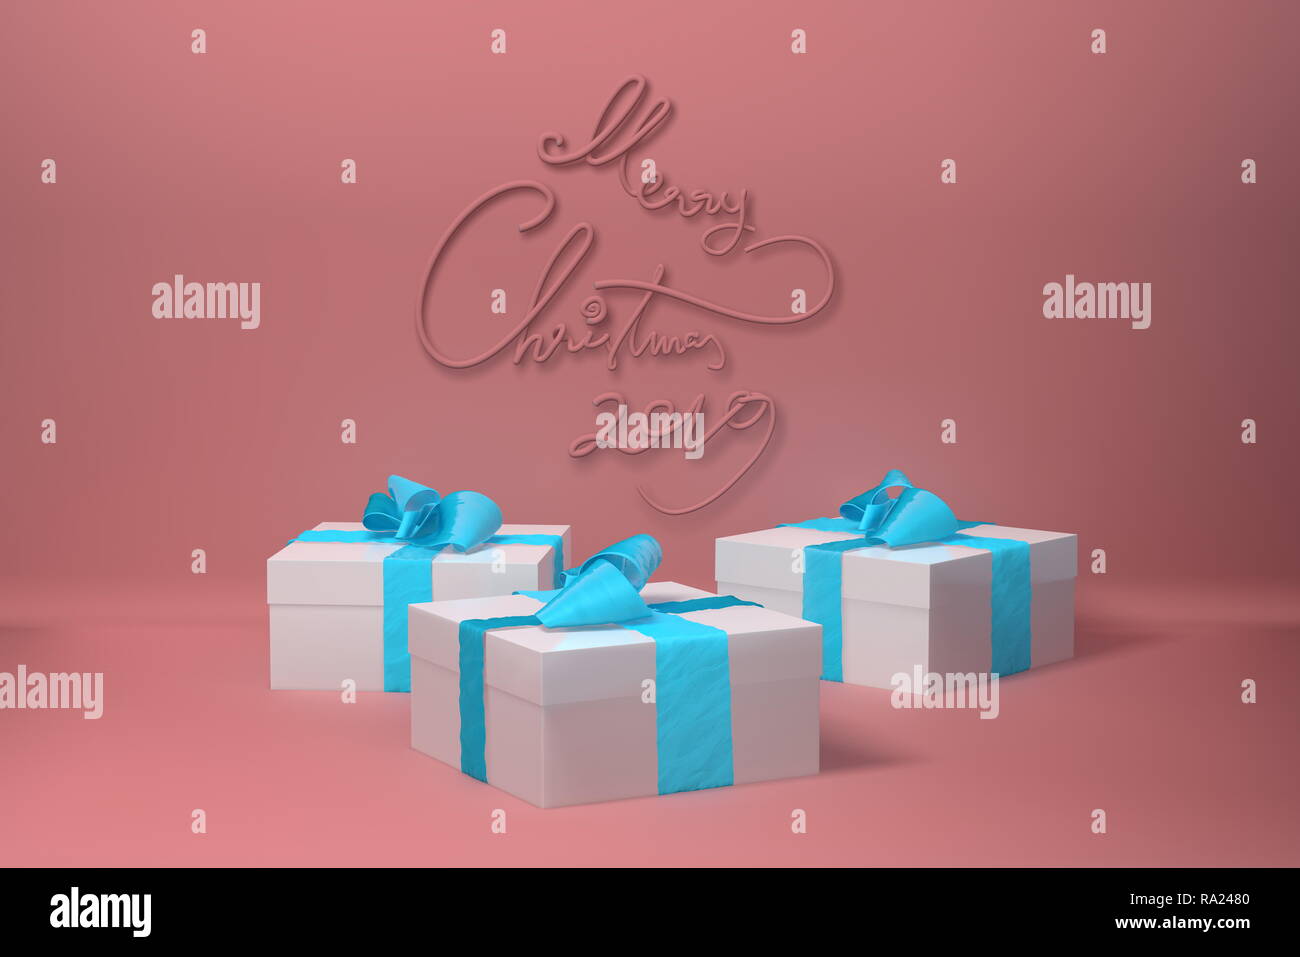 Merry Christmas 2019 lettering written in pink color wall and three present gift boxes with bows beside. 3d illustration Stock Photo